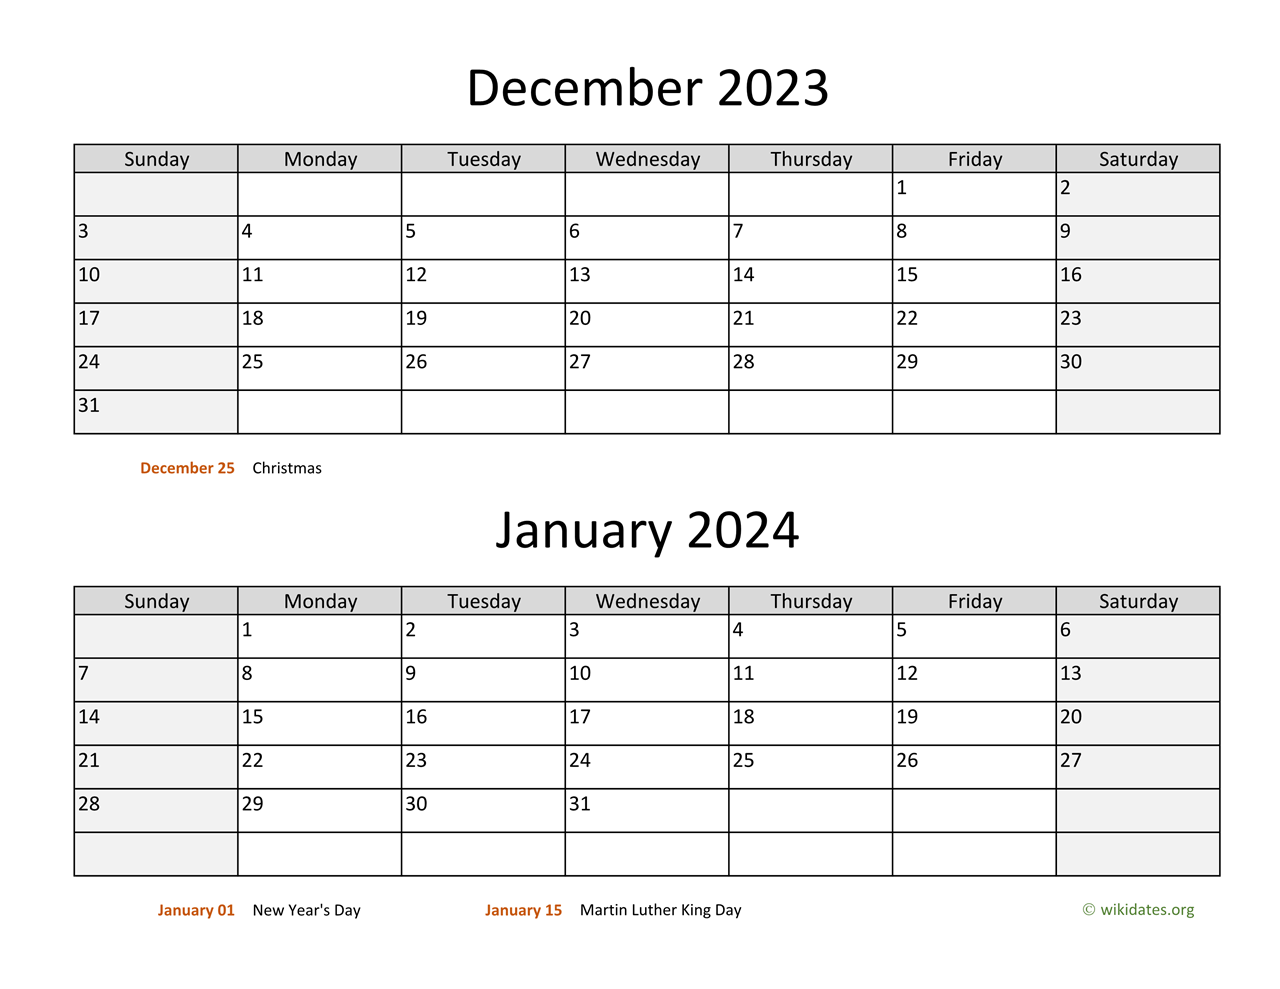 December 2023 And January 2024 Calendar | Wikidates for December 2023 January 2024 Calendar Printable